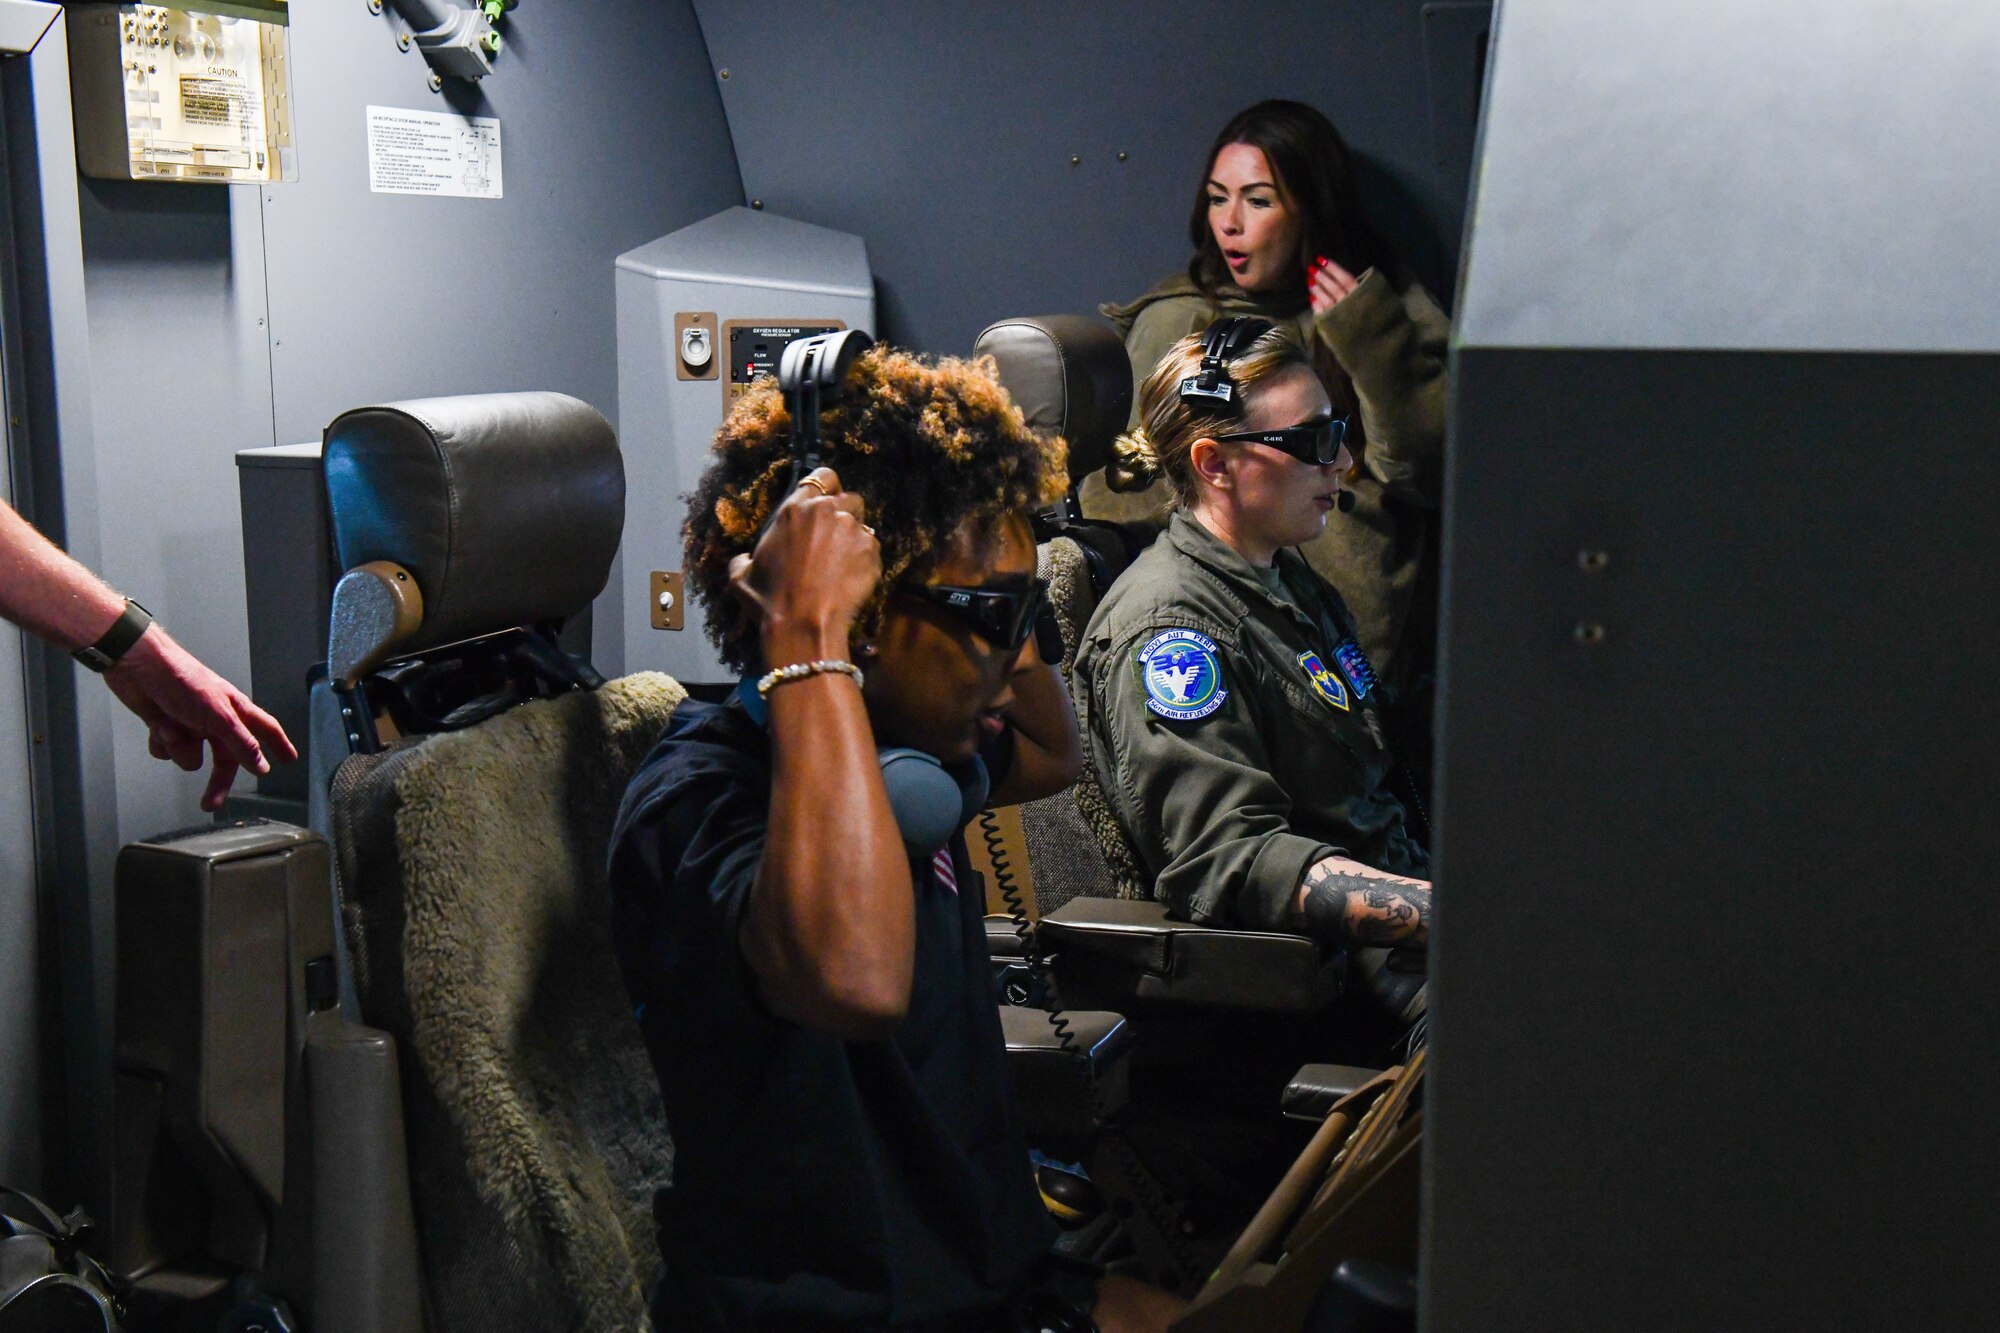 Shaneka Vondohlen, spouse of Senior Master Sgt. Joseph Vondohlen, dons a headset on a KC-46 Pegasus at Altus Air Force Base, Oklahoma, July 11, 2022. The headsets are used to reduce noise and facilitate clear communication. (U.S. Air Force photo by Airman 1st Class Miyah Gray)